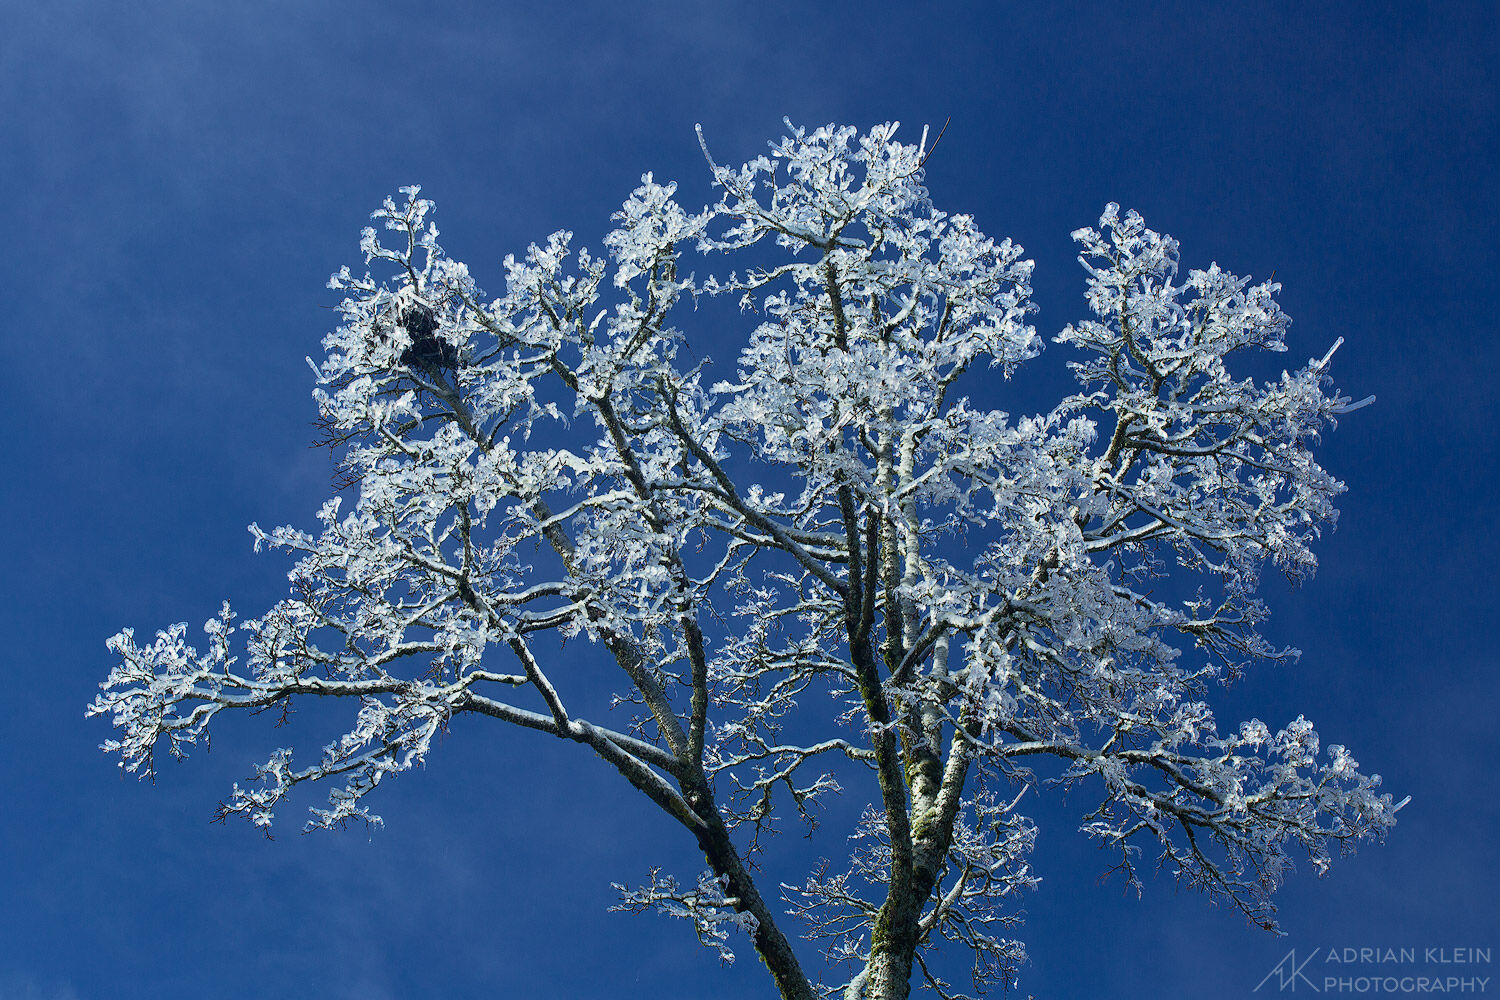 A tree in Portland, Oregon coated in thick ice as the sky clears from a winter storm of freezing rain.